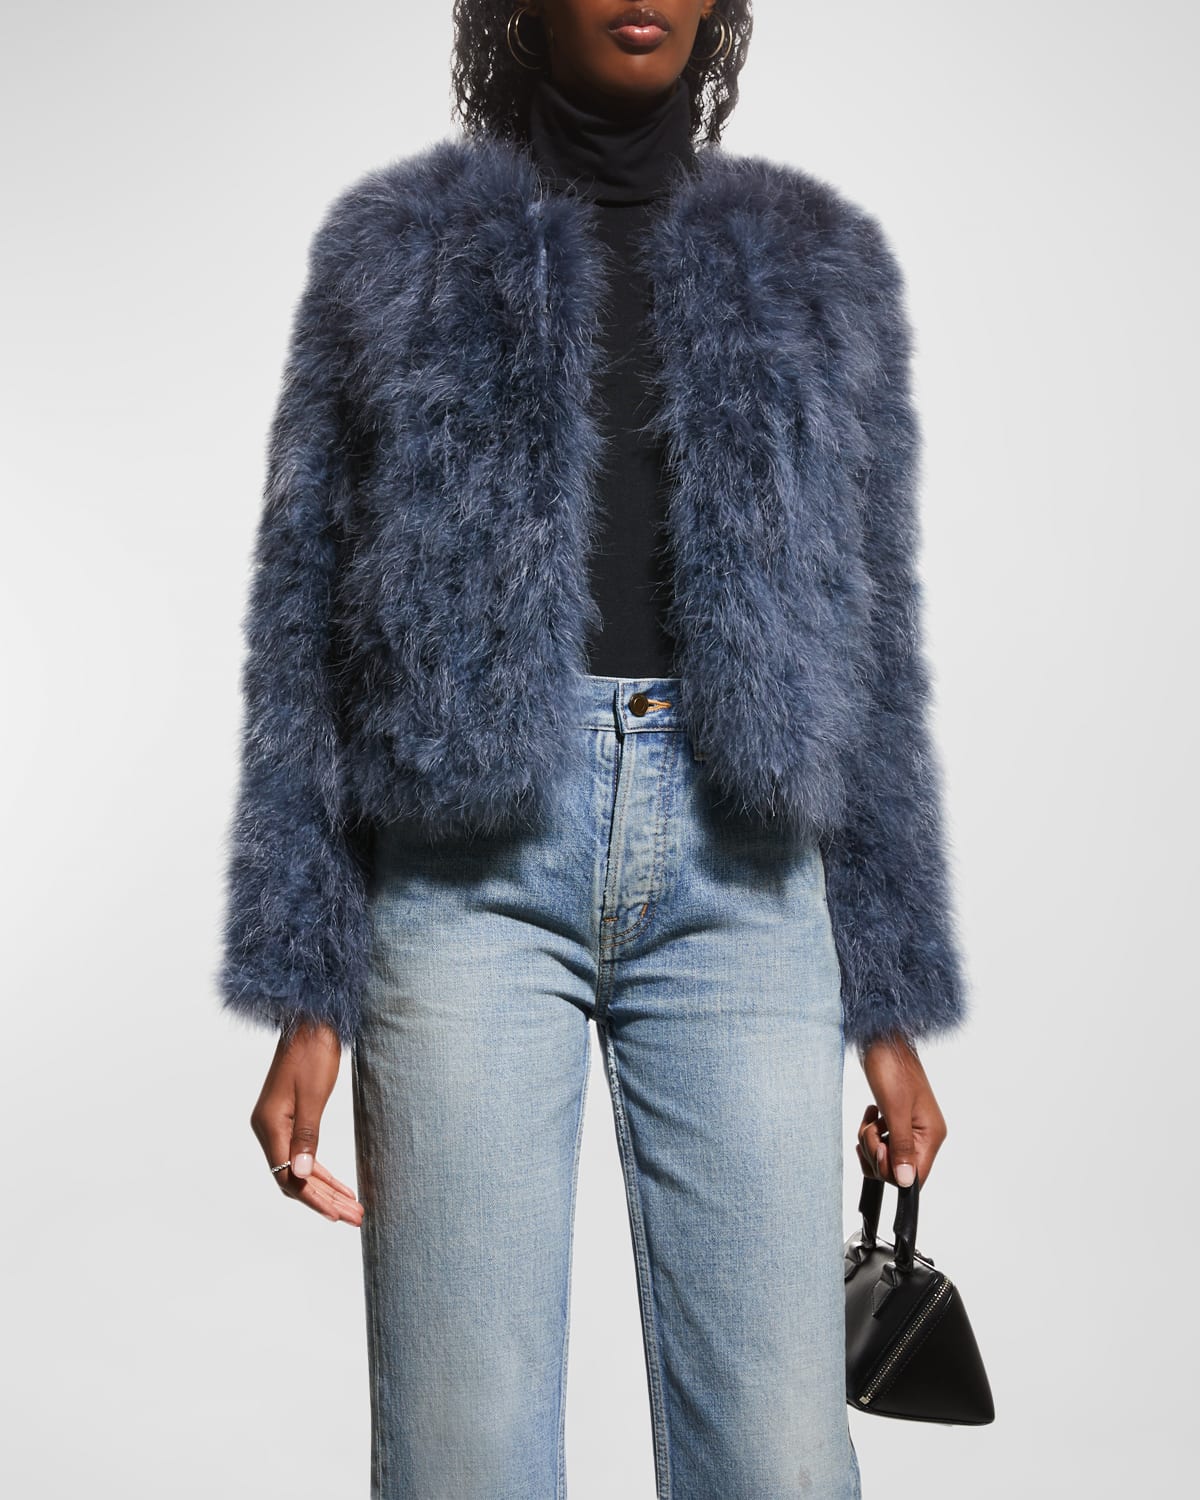 LAMARQUE DEORA FEATHER TOPPER JACKET